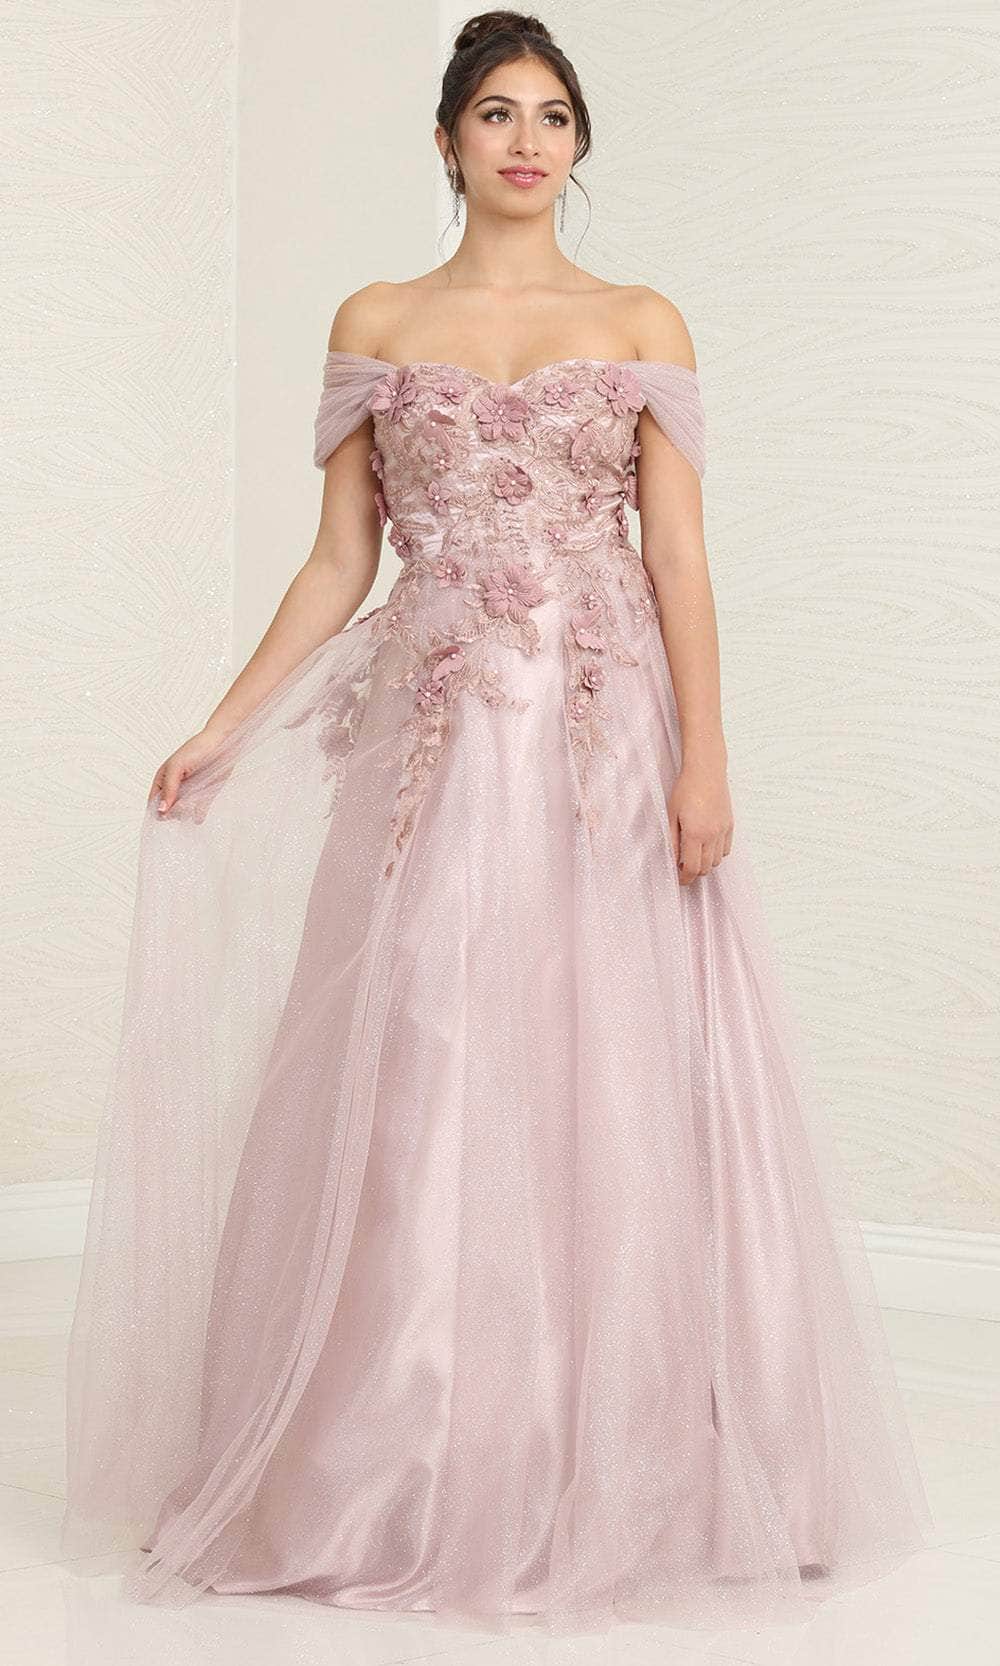 May Queen RQ8109 - Sweetheart A-Line Prom Gown Prom Dresses 4 / Mauve